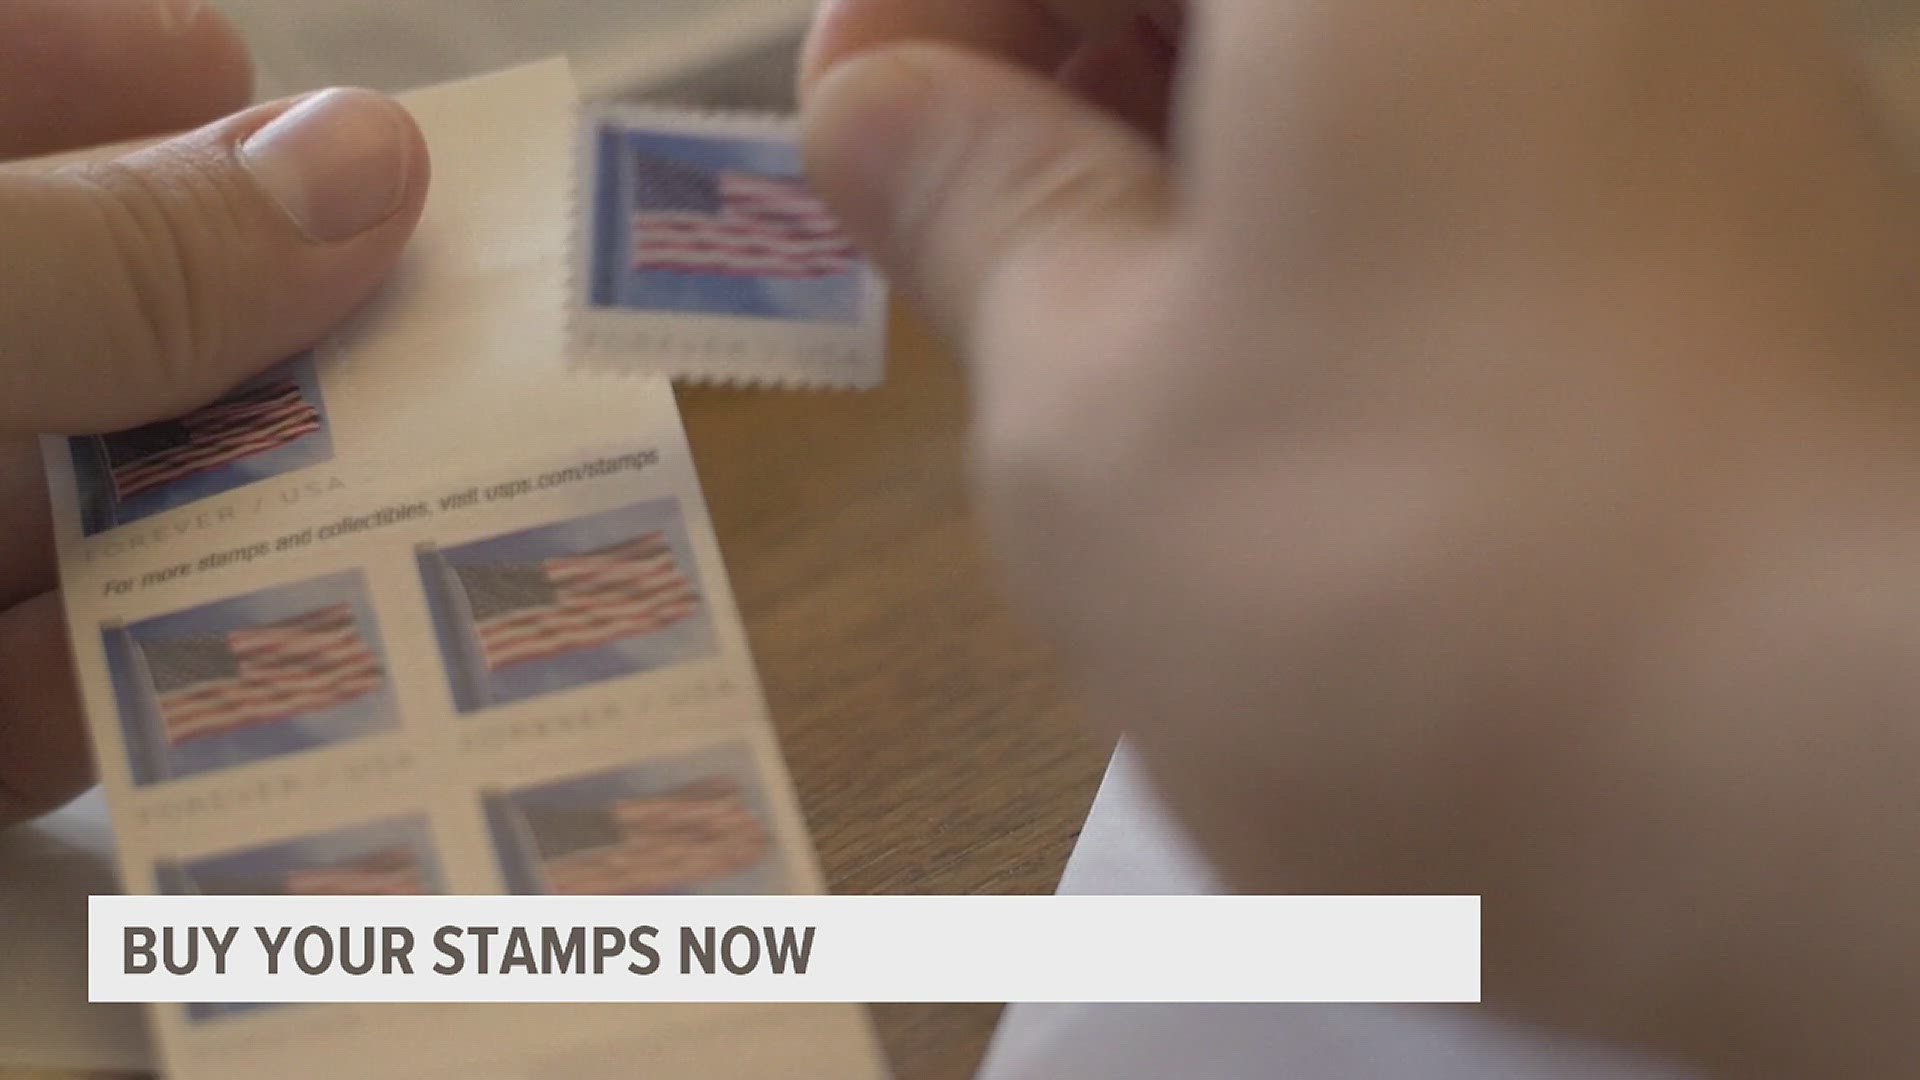 Buy your stamps now: Price for first class stamps set to increase